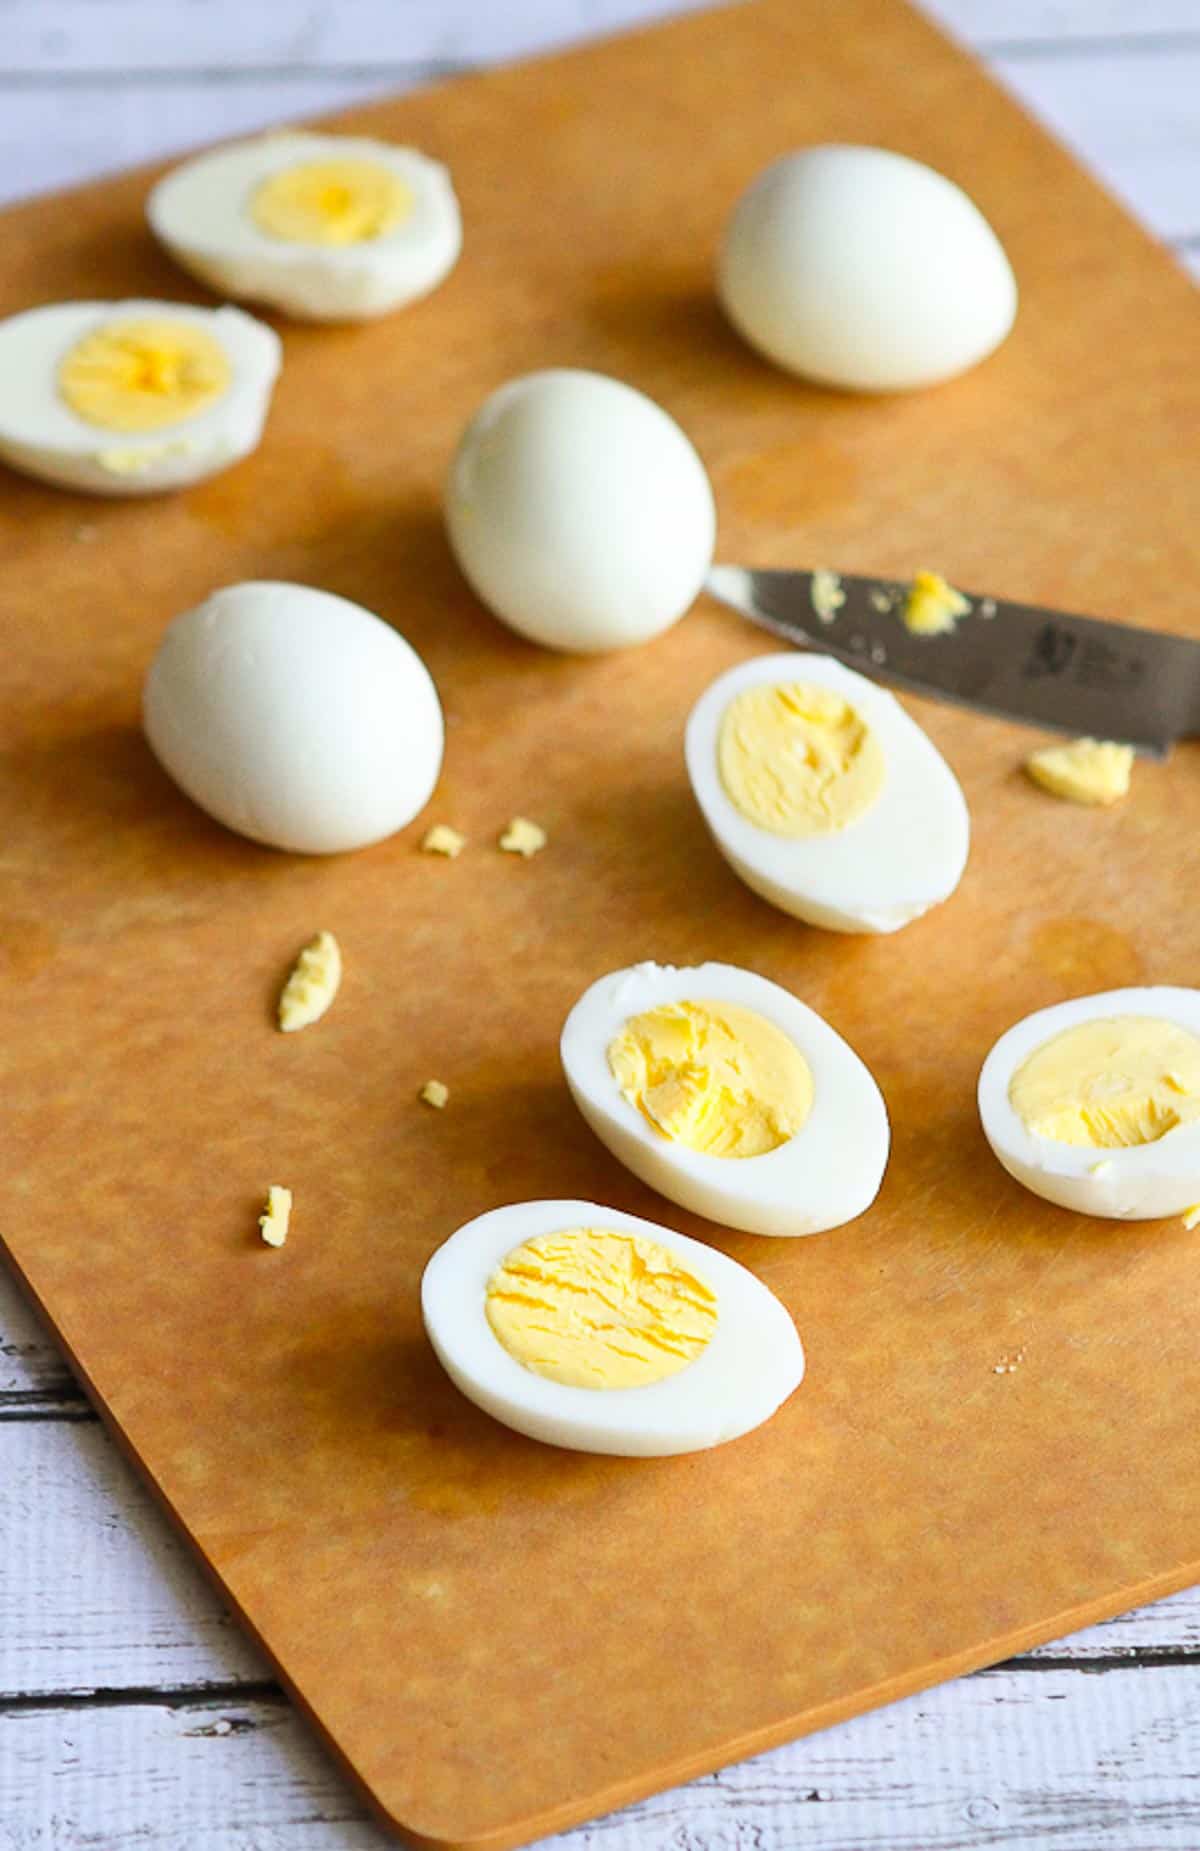 Hard boiled egg halves and knife on a cutting board.